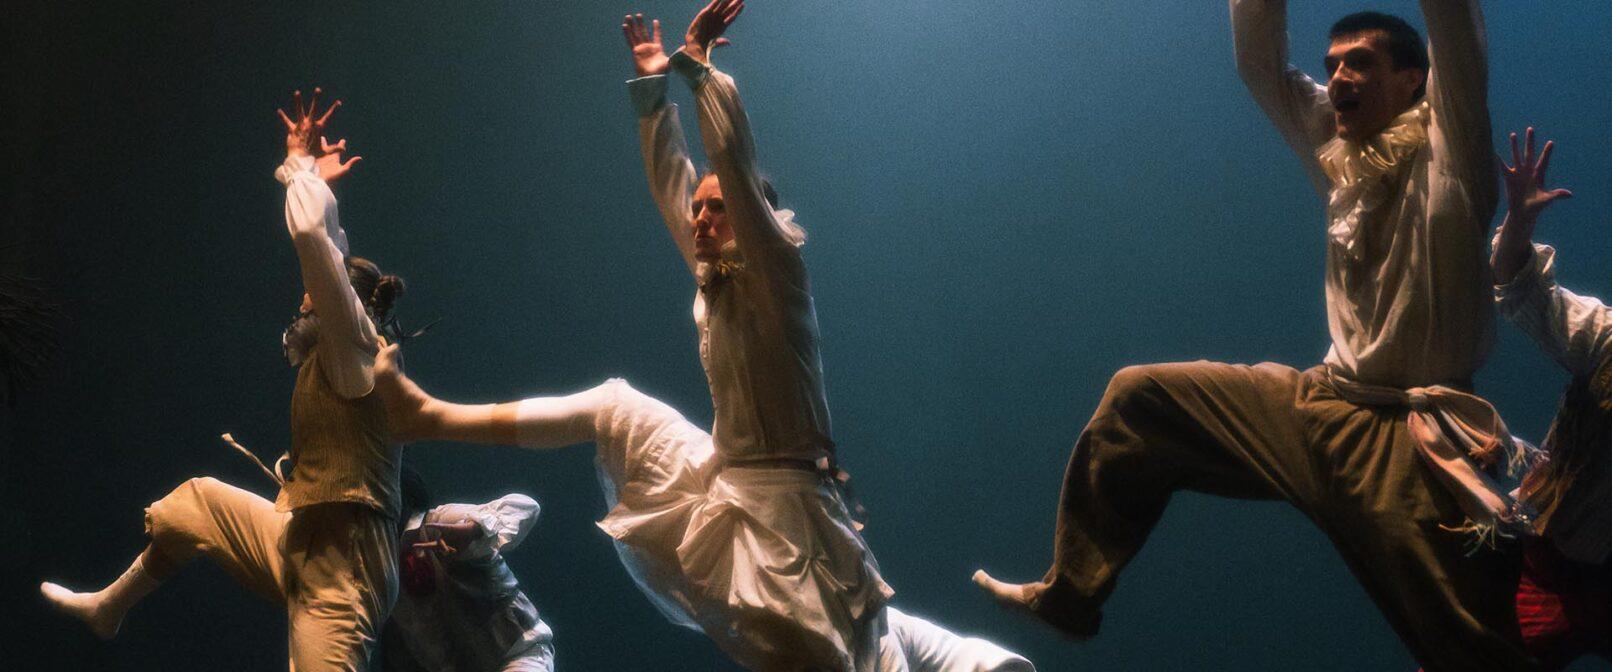 Hofesh Shechter Company. Three men leap with arms raised and one foot in the air.